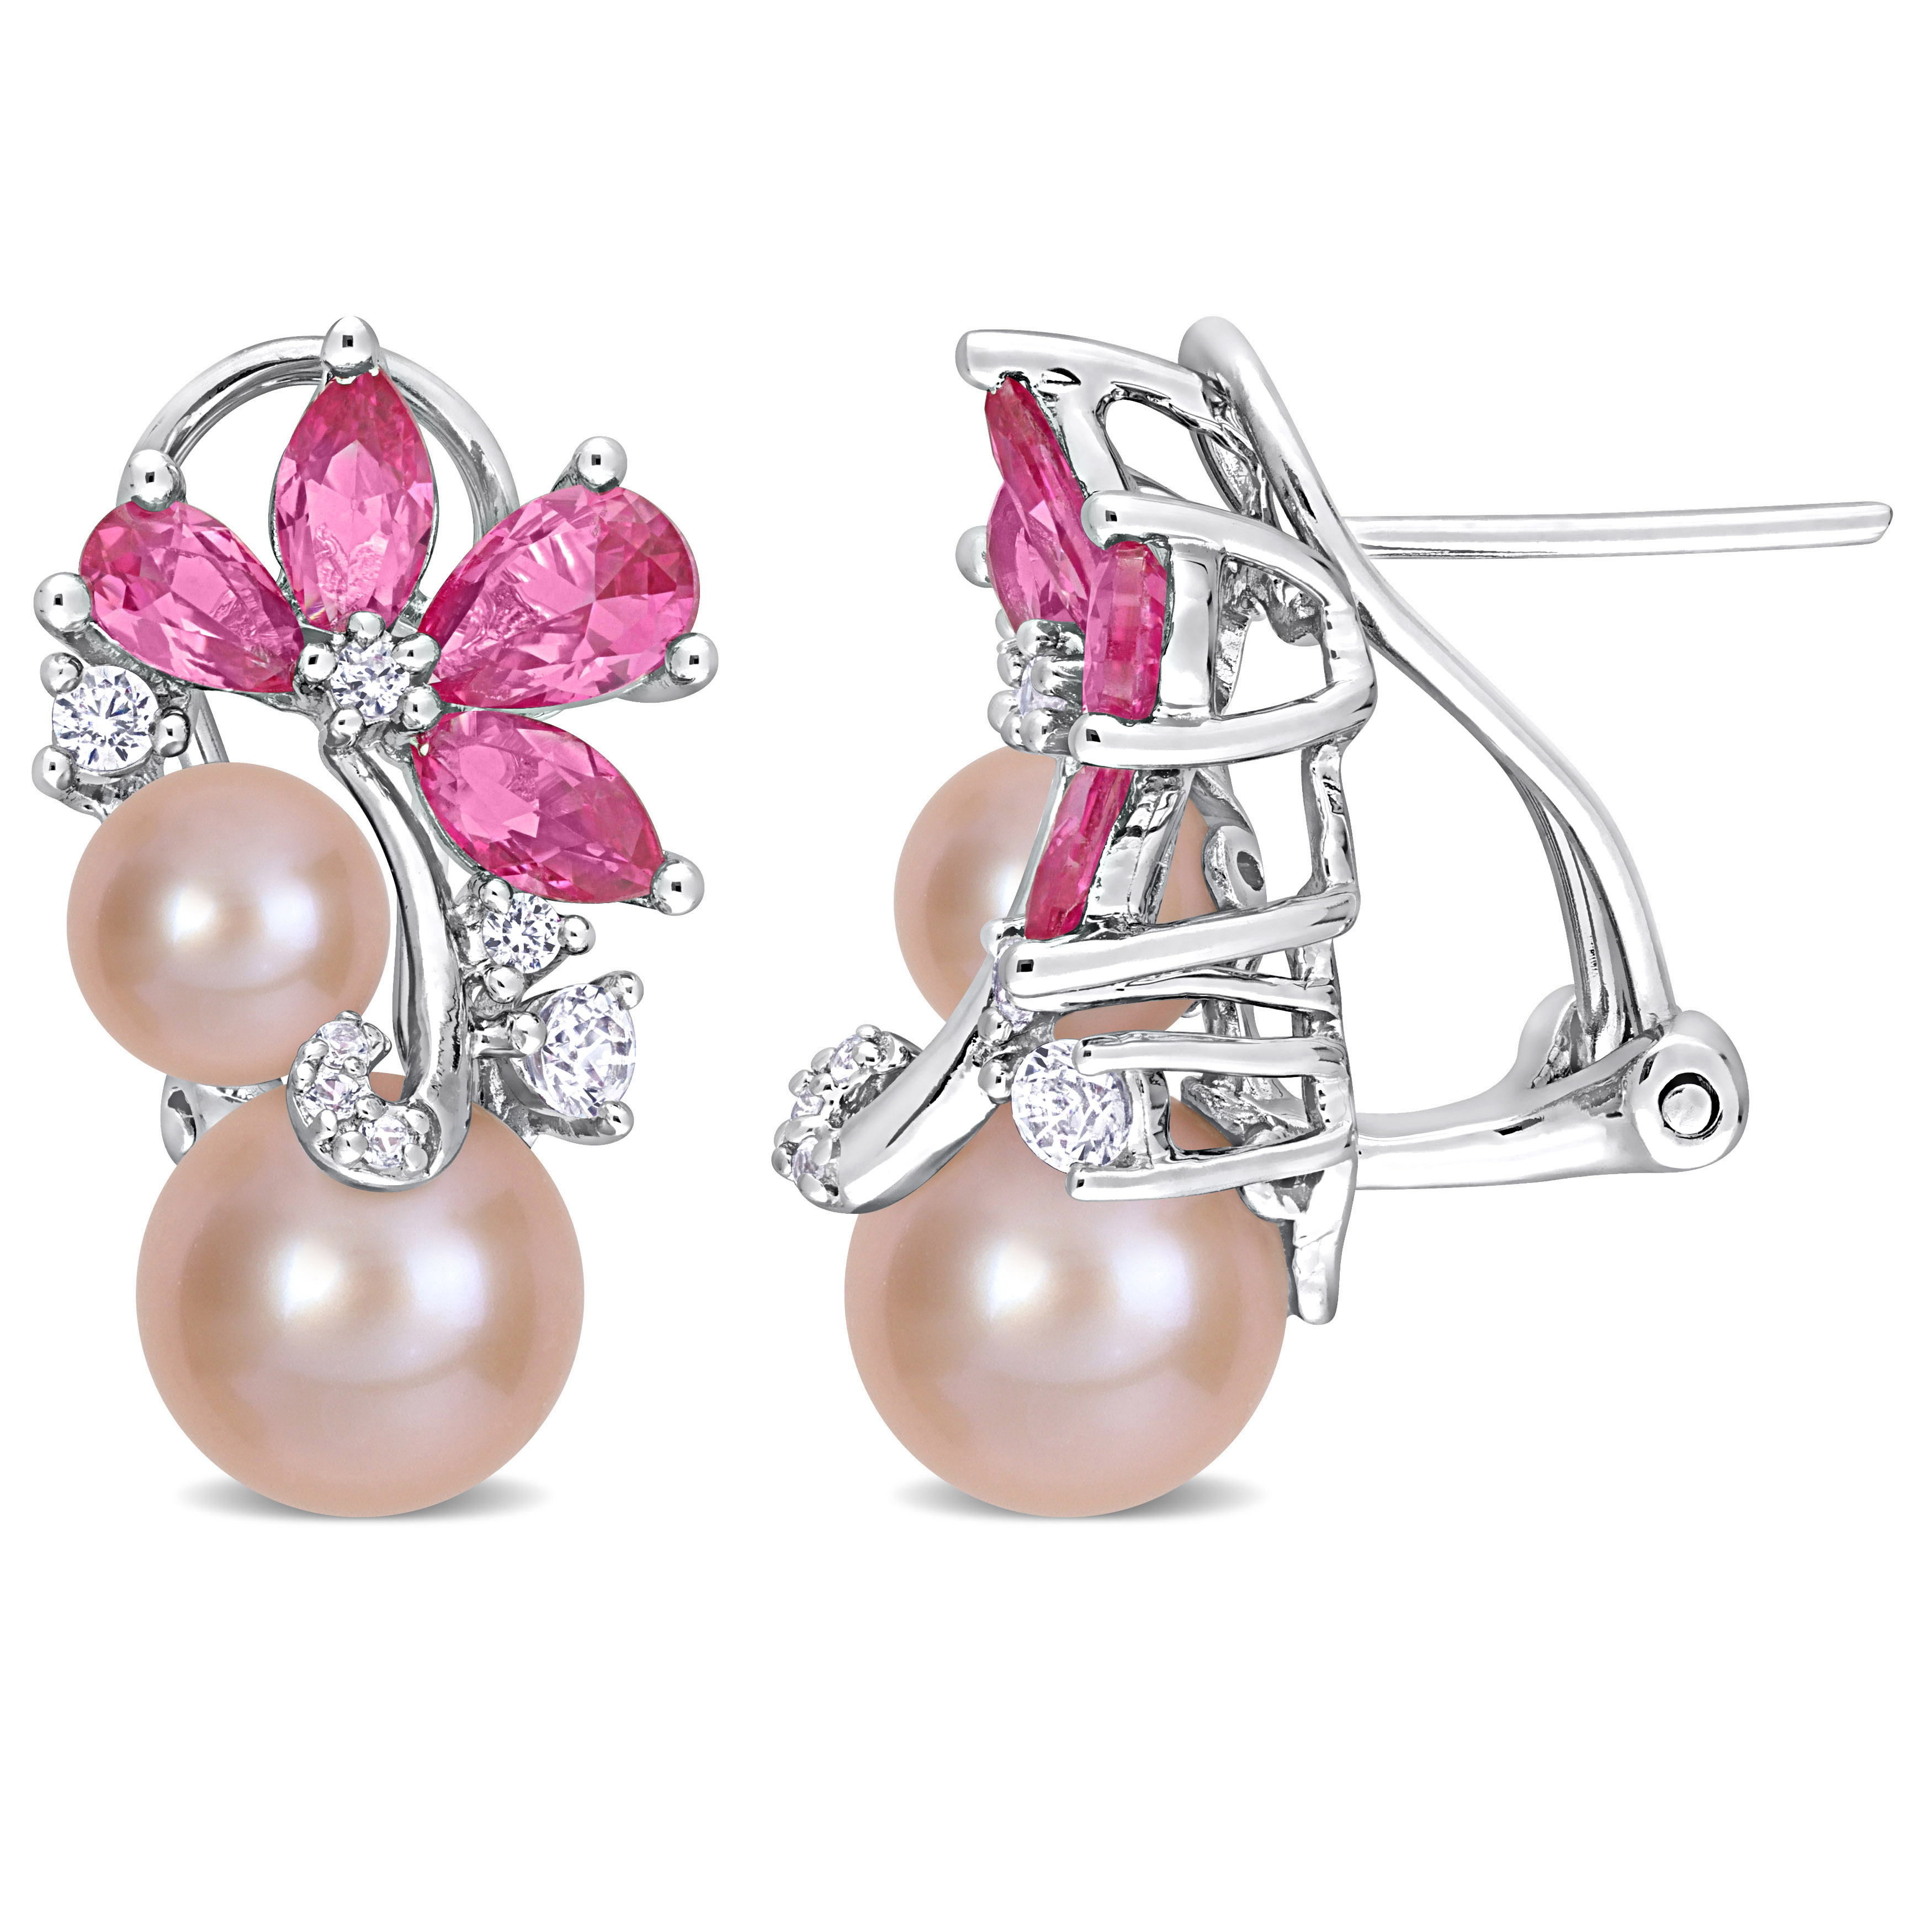 Pink Cultured Freshwater Pearl & 4 1/4 CT TGW Created Pink and White Sapphire Earings in Sterling Silver